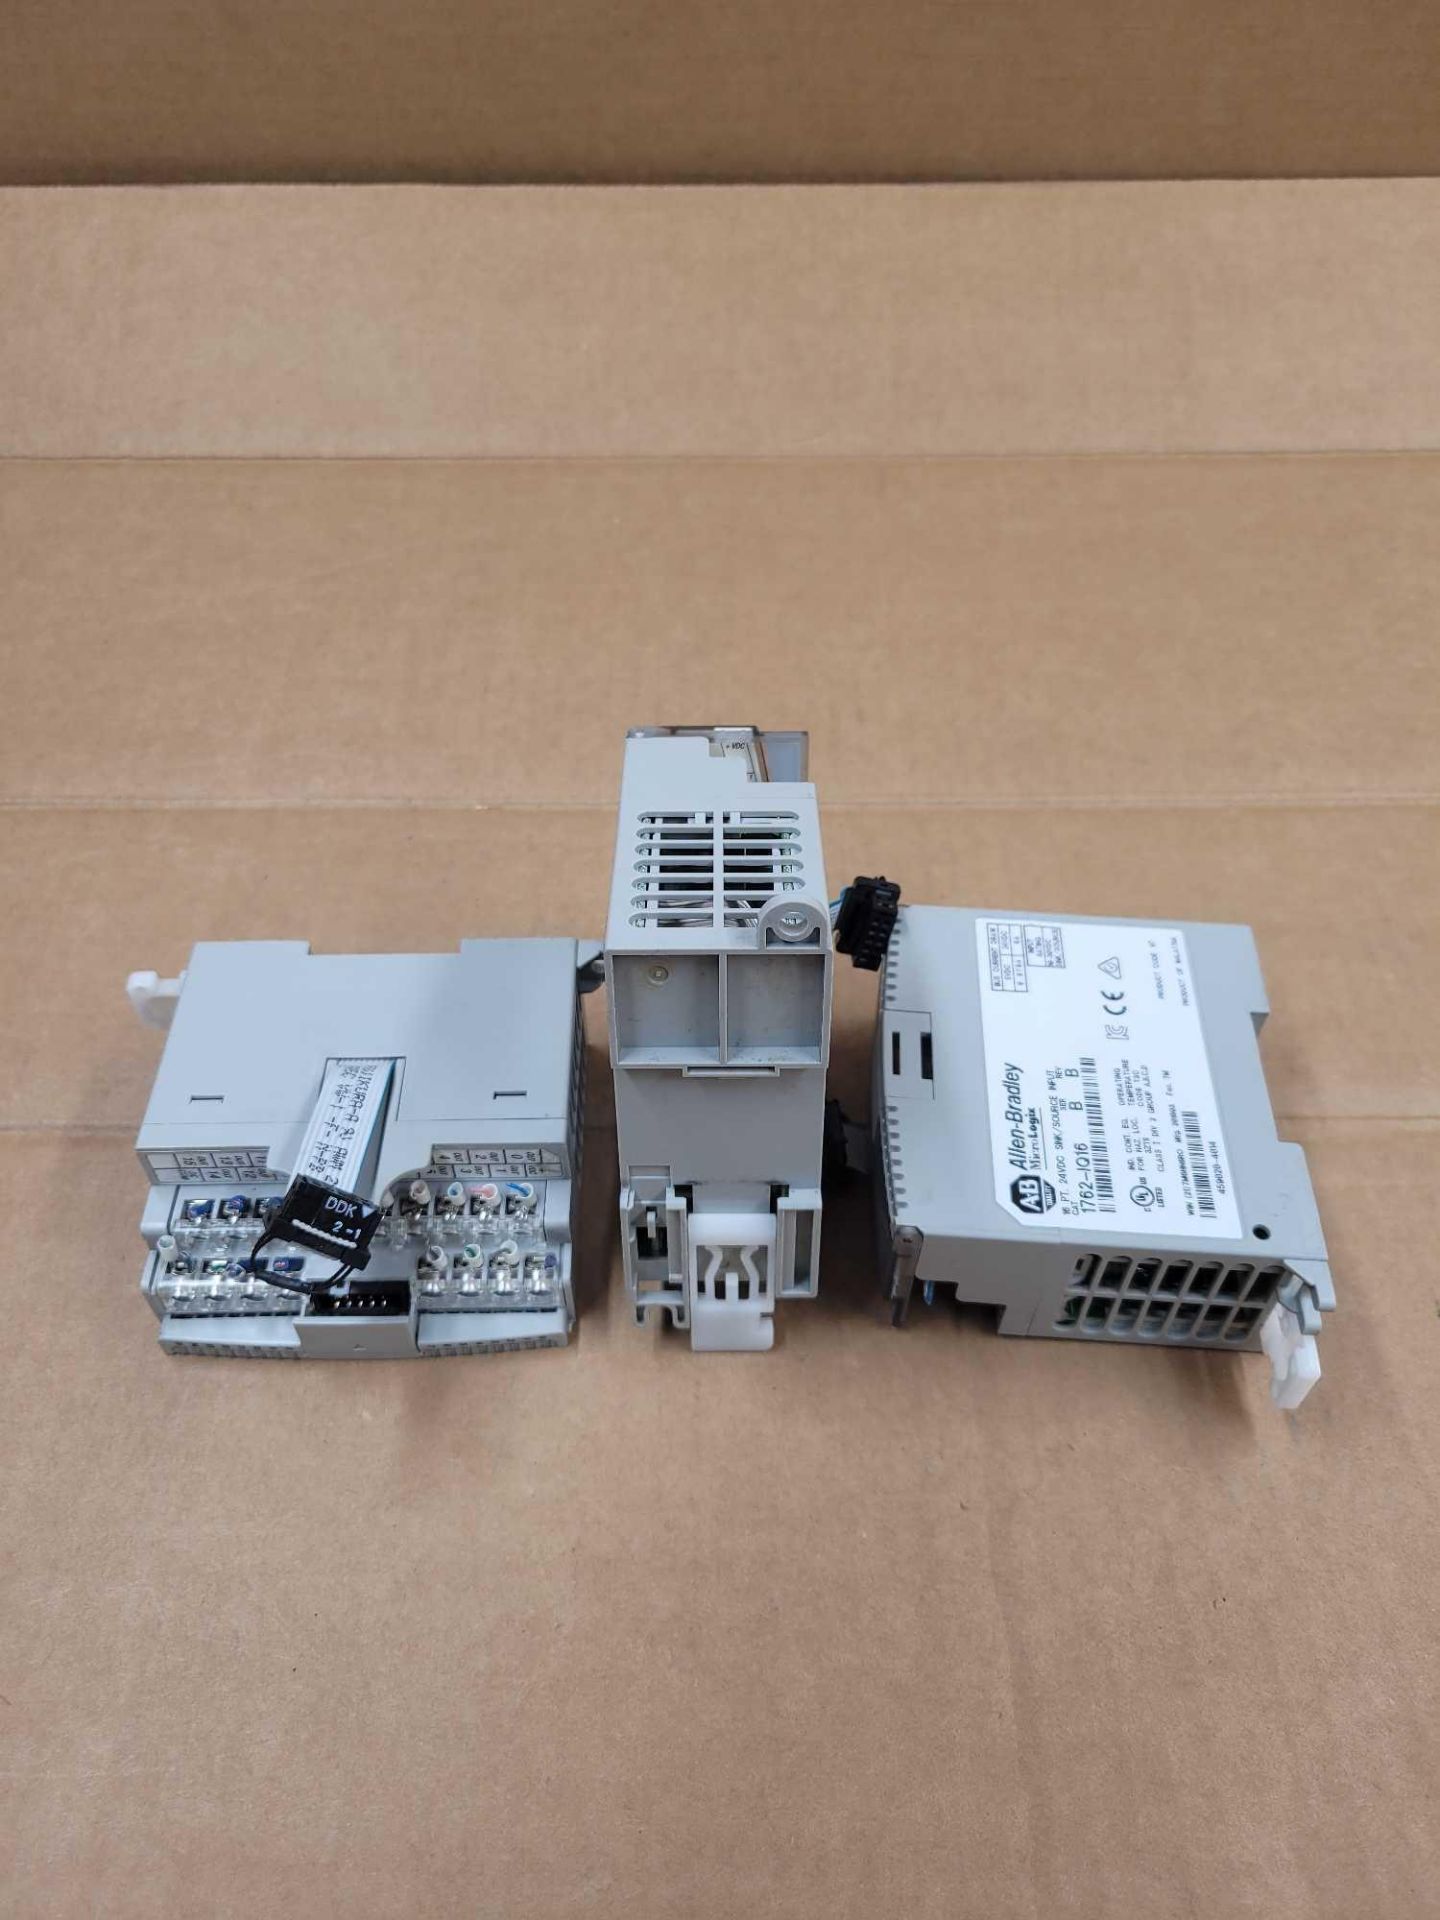 LOT OF 3 ALLEN BRADLEY 1762-OB16 / Series A MicroLogix Output Module  /  Lot Weight: 1.0 lbs - Image 11 of 11